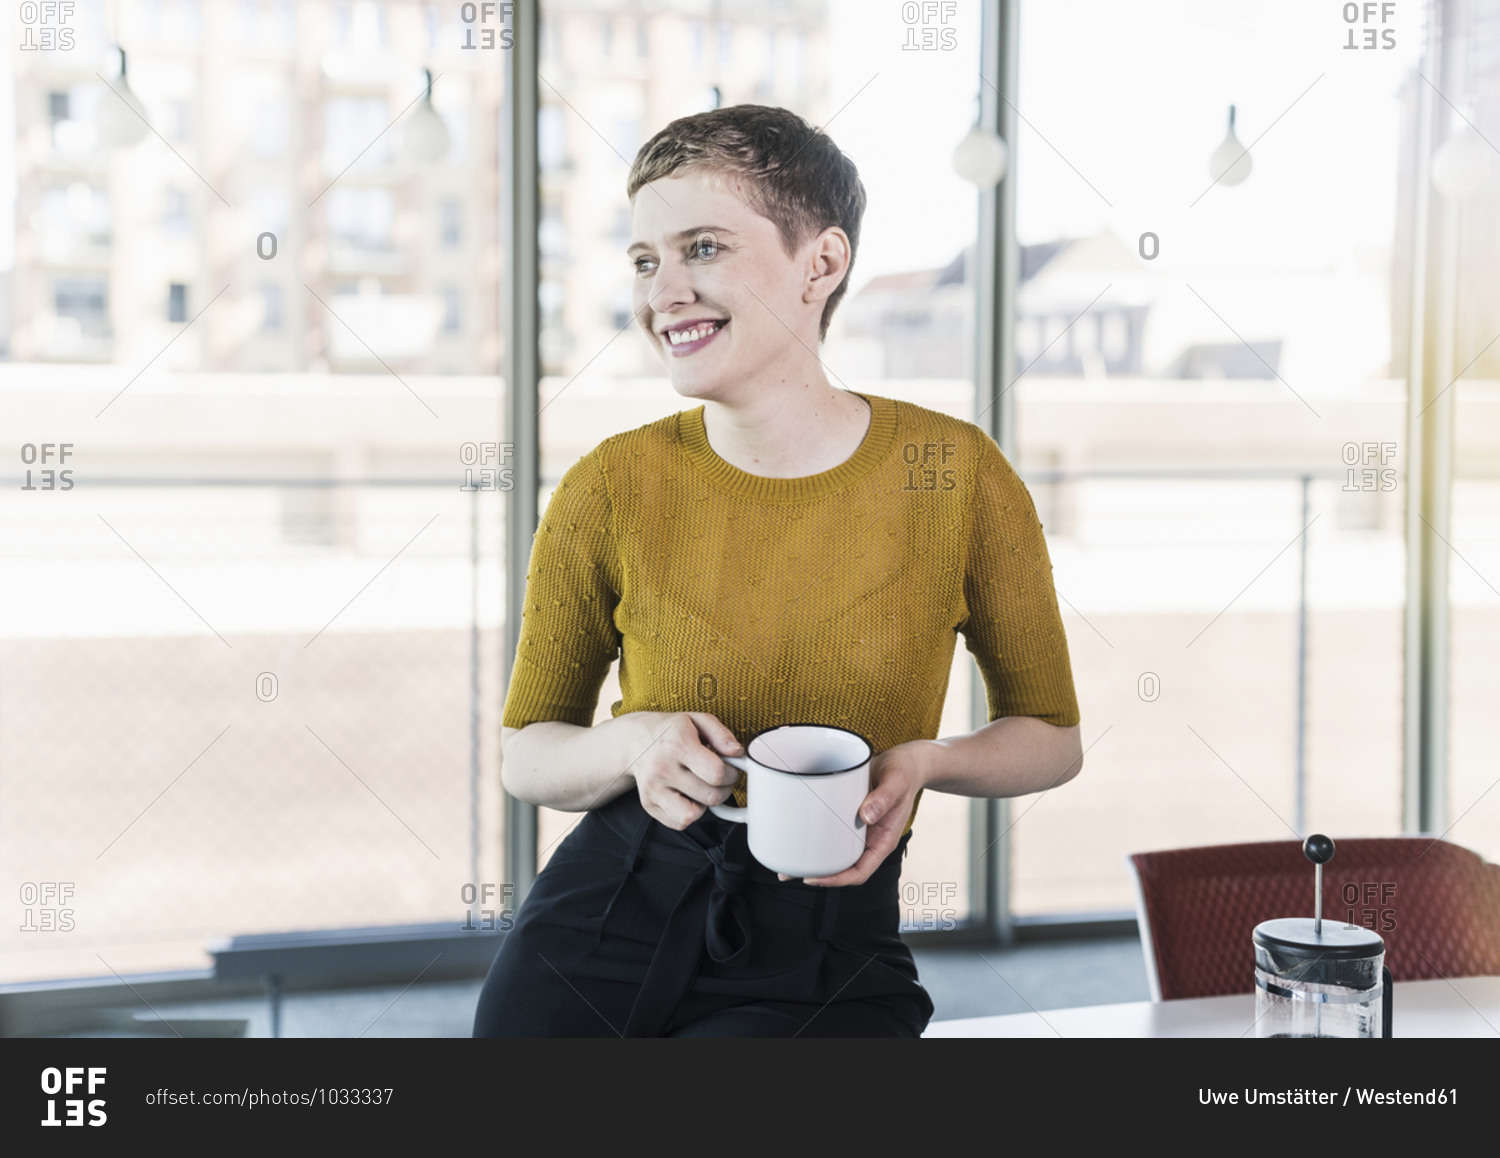 Smiling businesswoman in office holding coffee mug